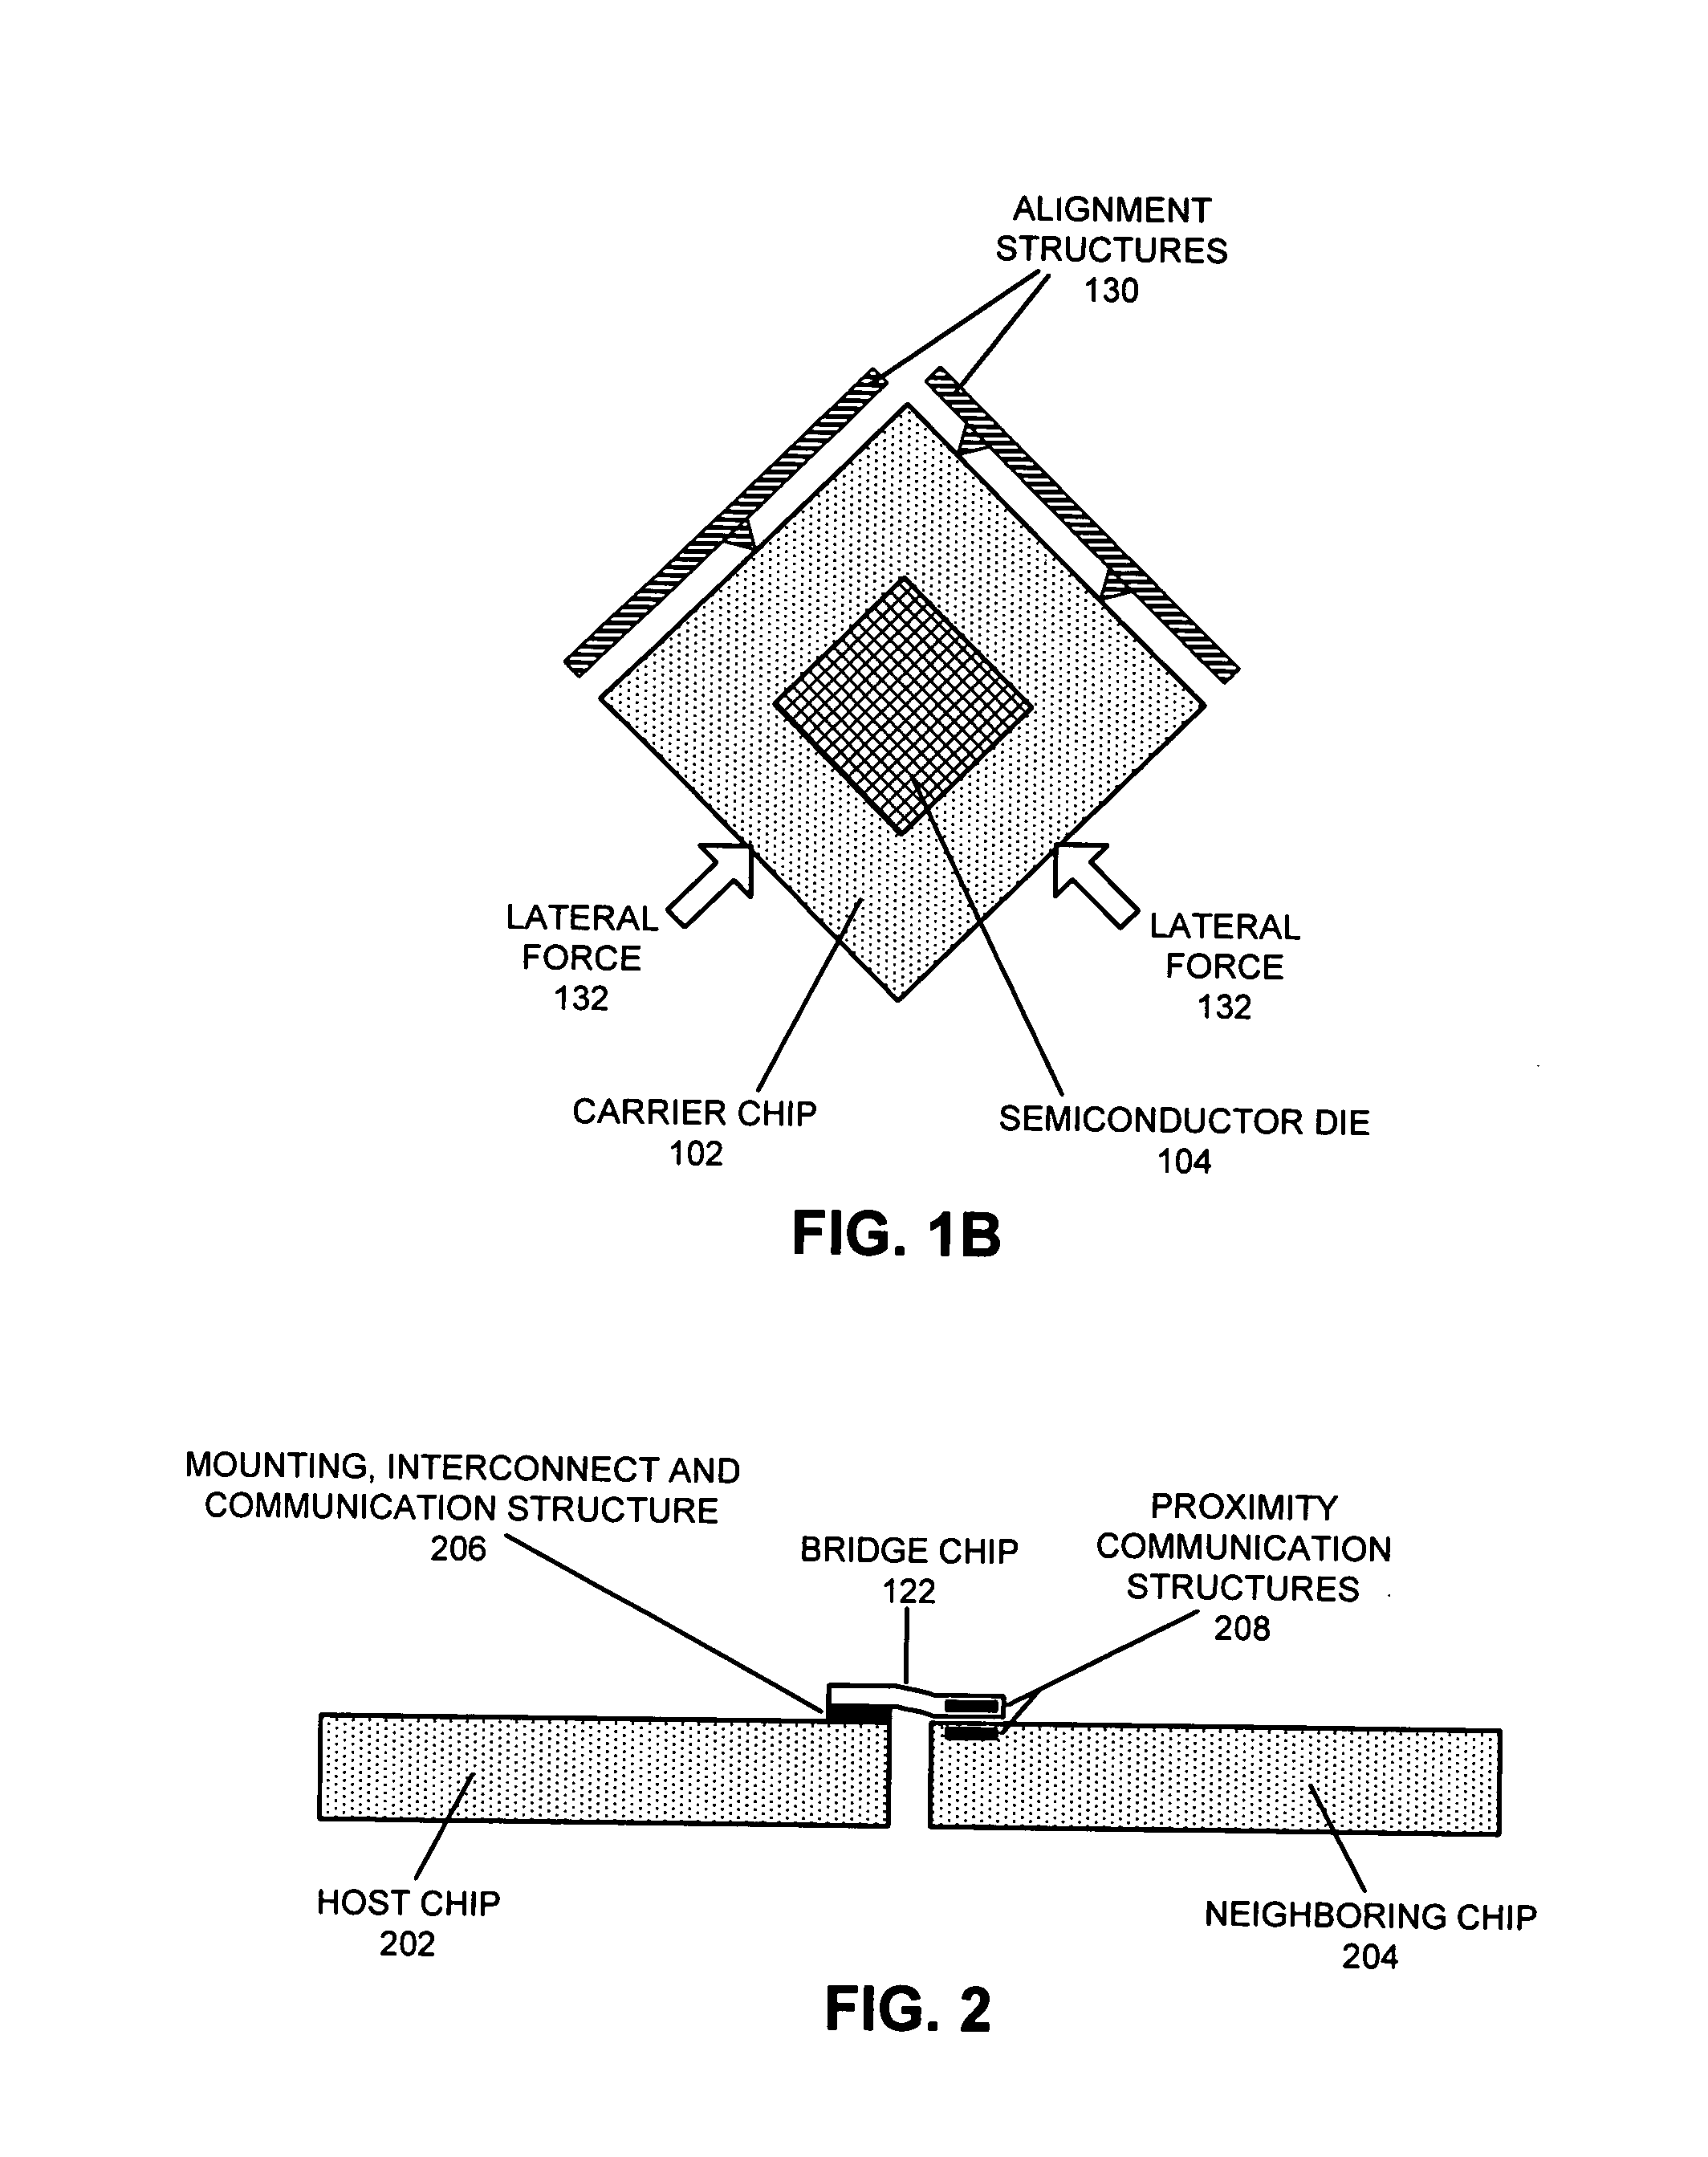 Multi-chip module structure with power delivery using flexible cables